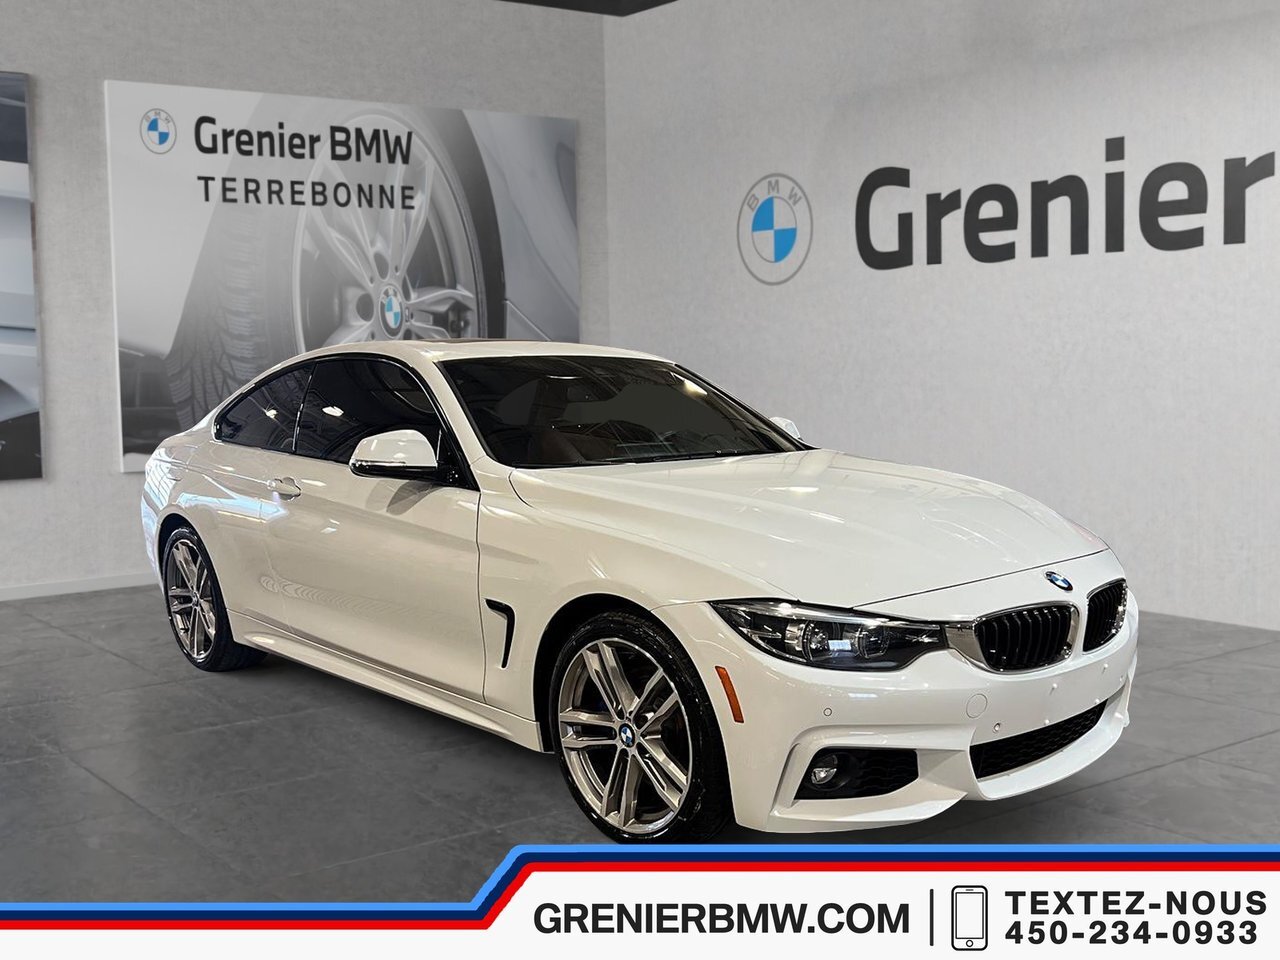 2019 BMW 4 Series 440i XDrive Coupe, M SPORT PACKAGE M SPORT PACKAGE